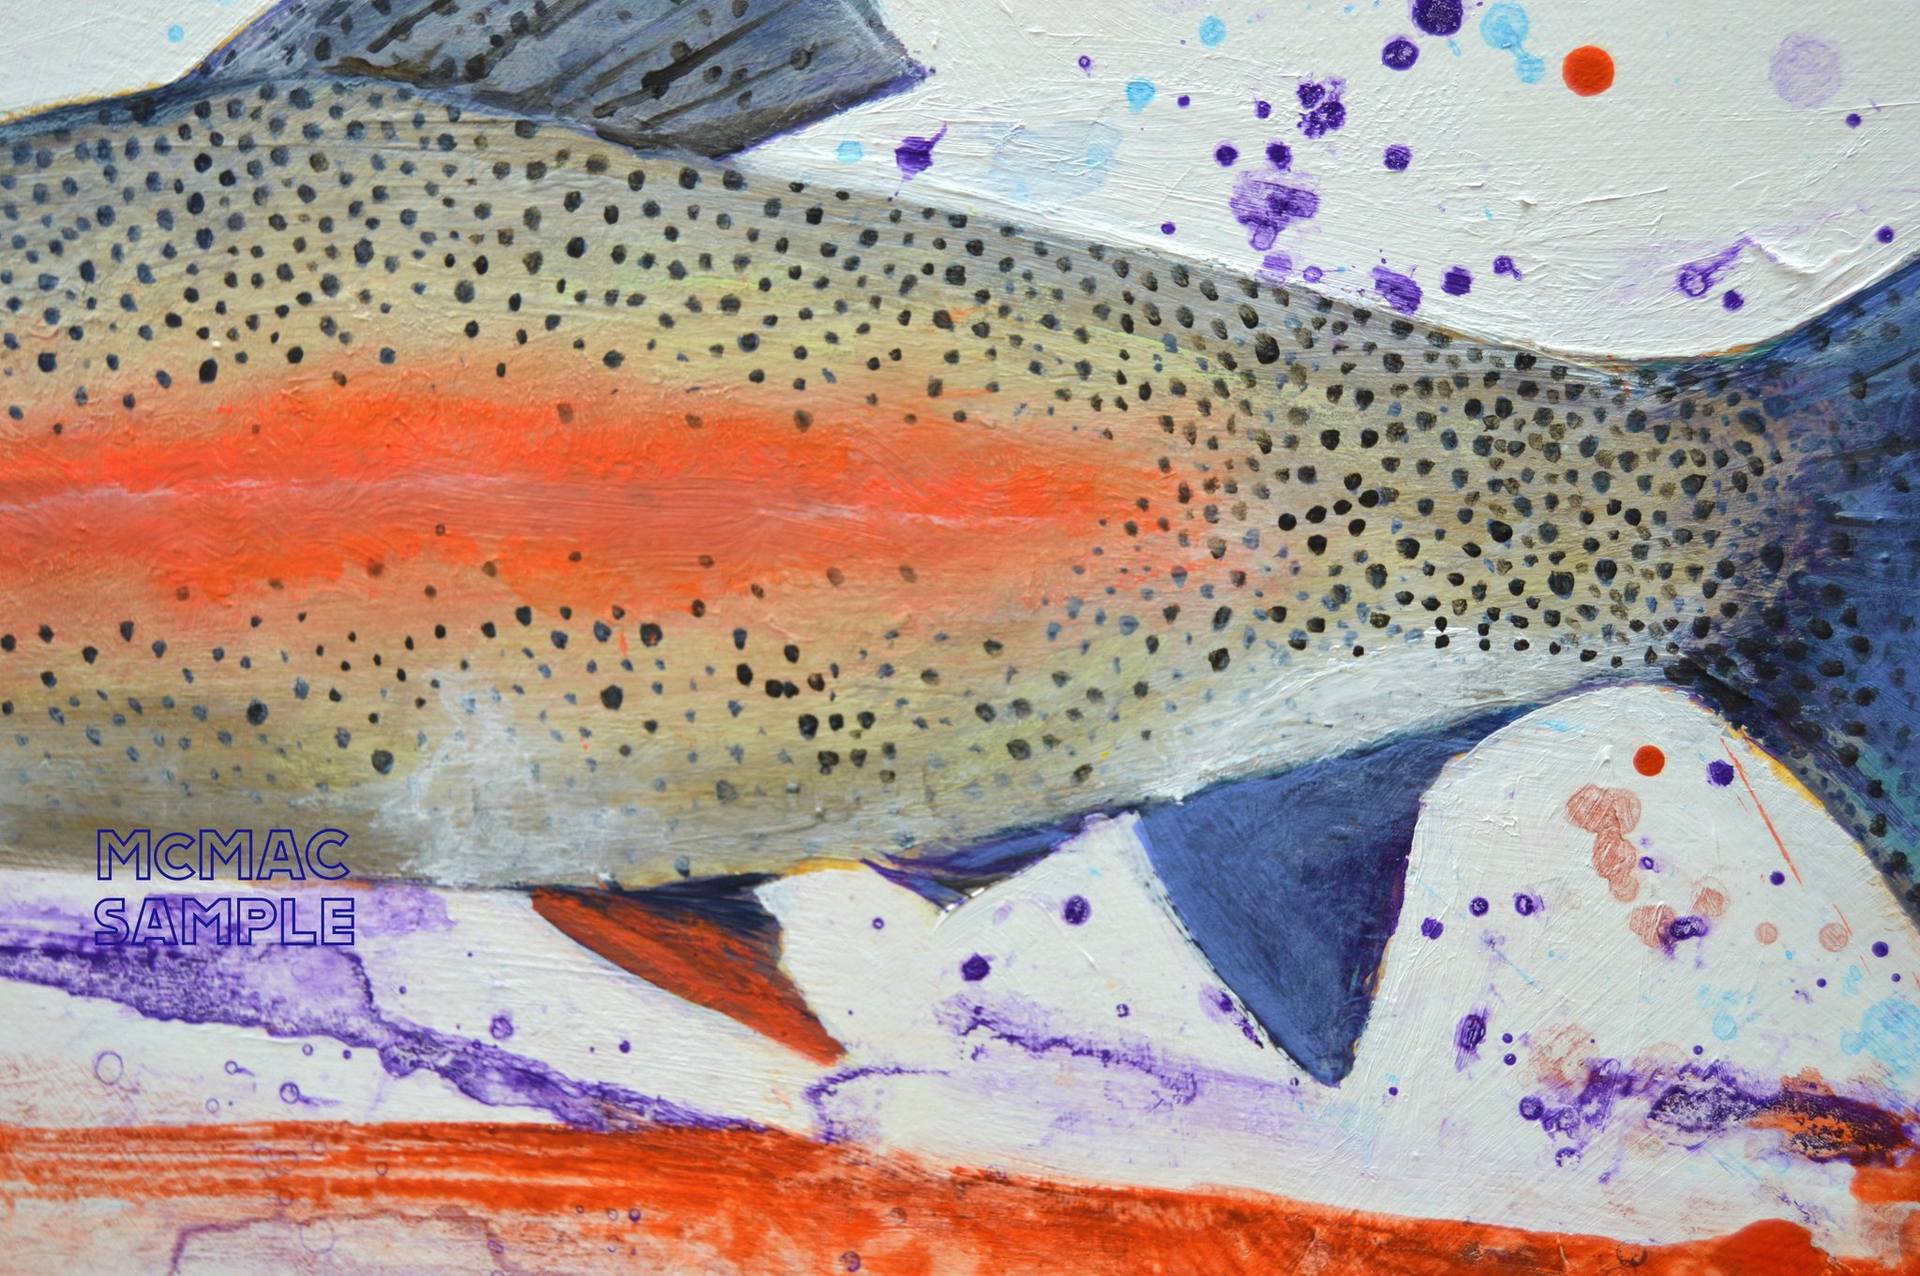  Trout Fishing Art, Pastel & Watercolor Fish Painting